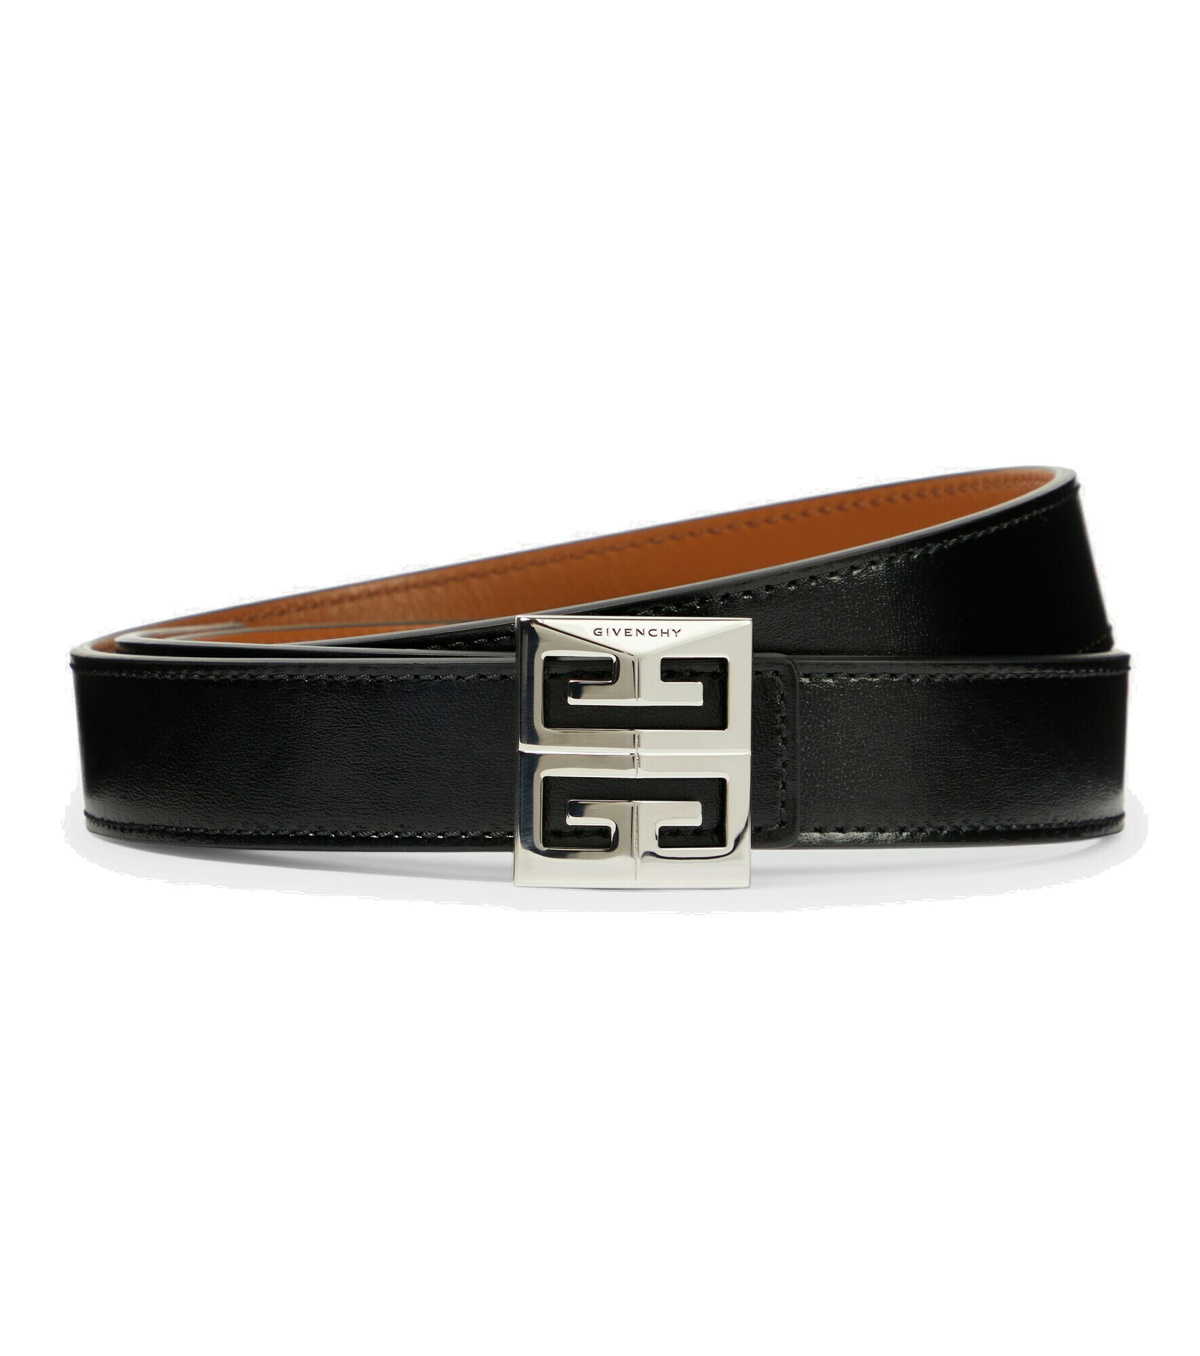 Givenchy - 4G reversible leather belt Givenchy